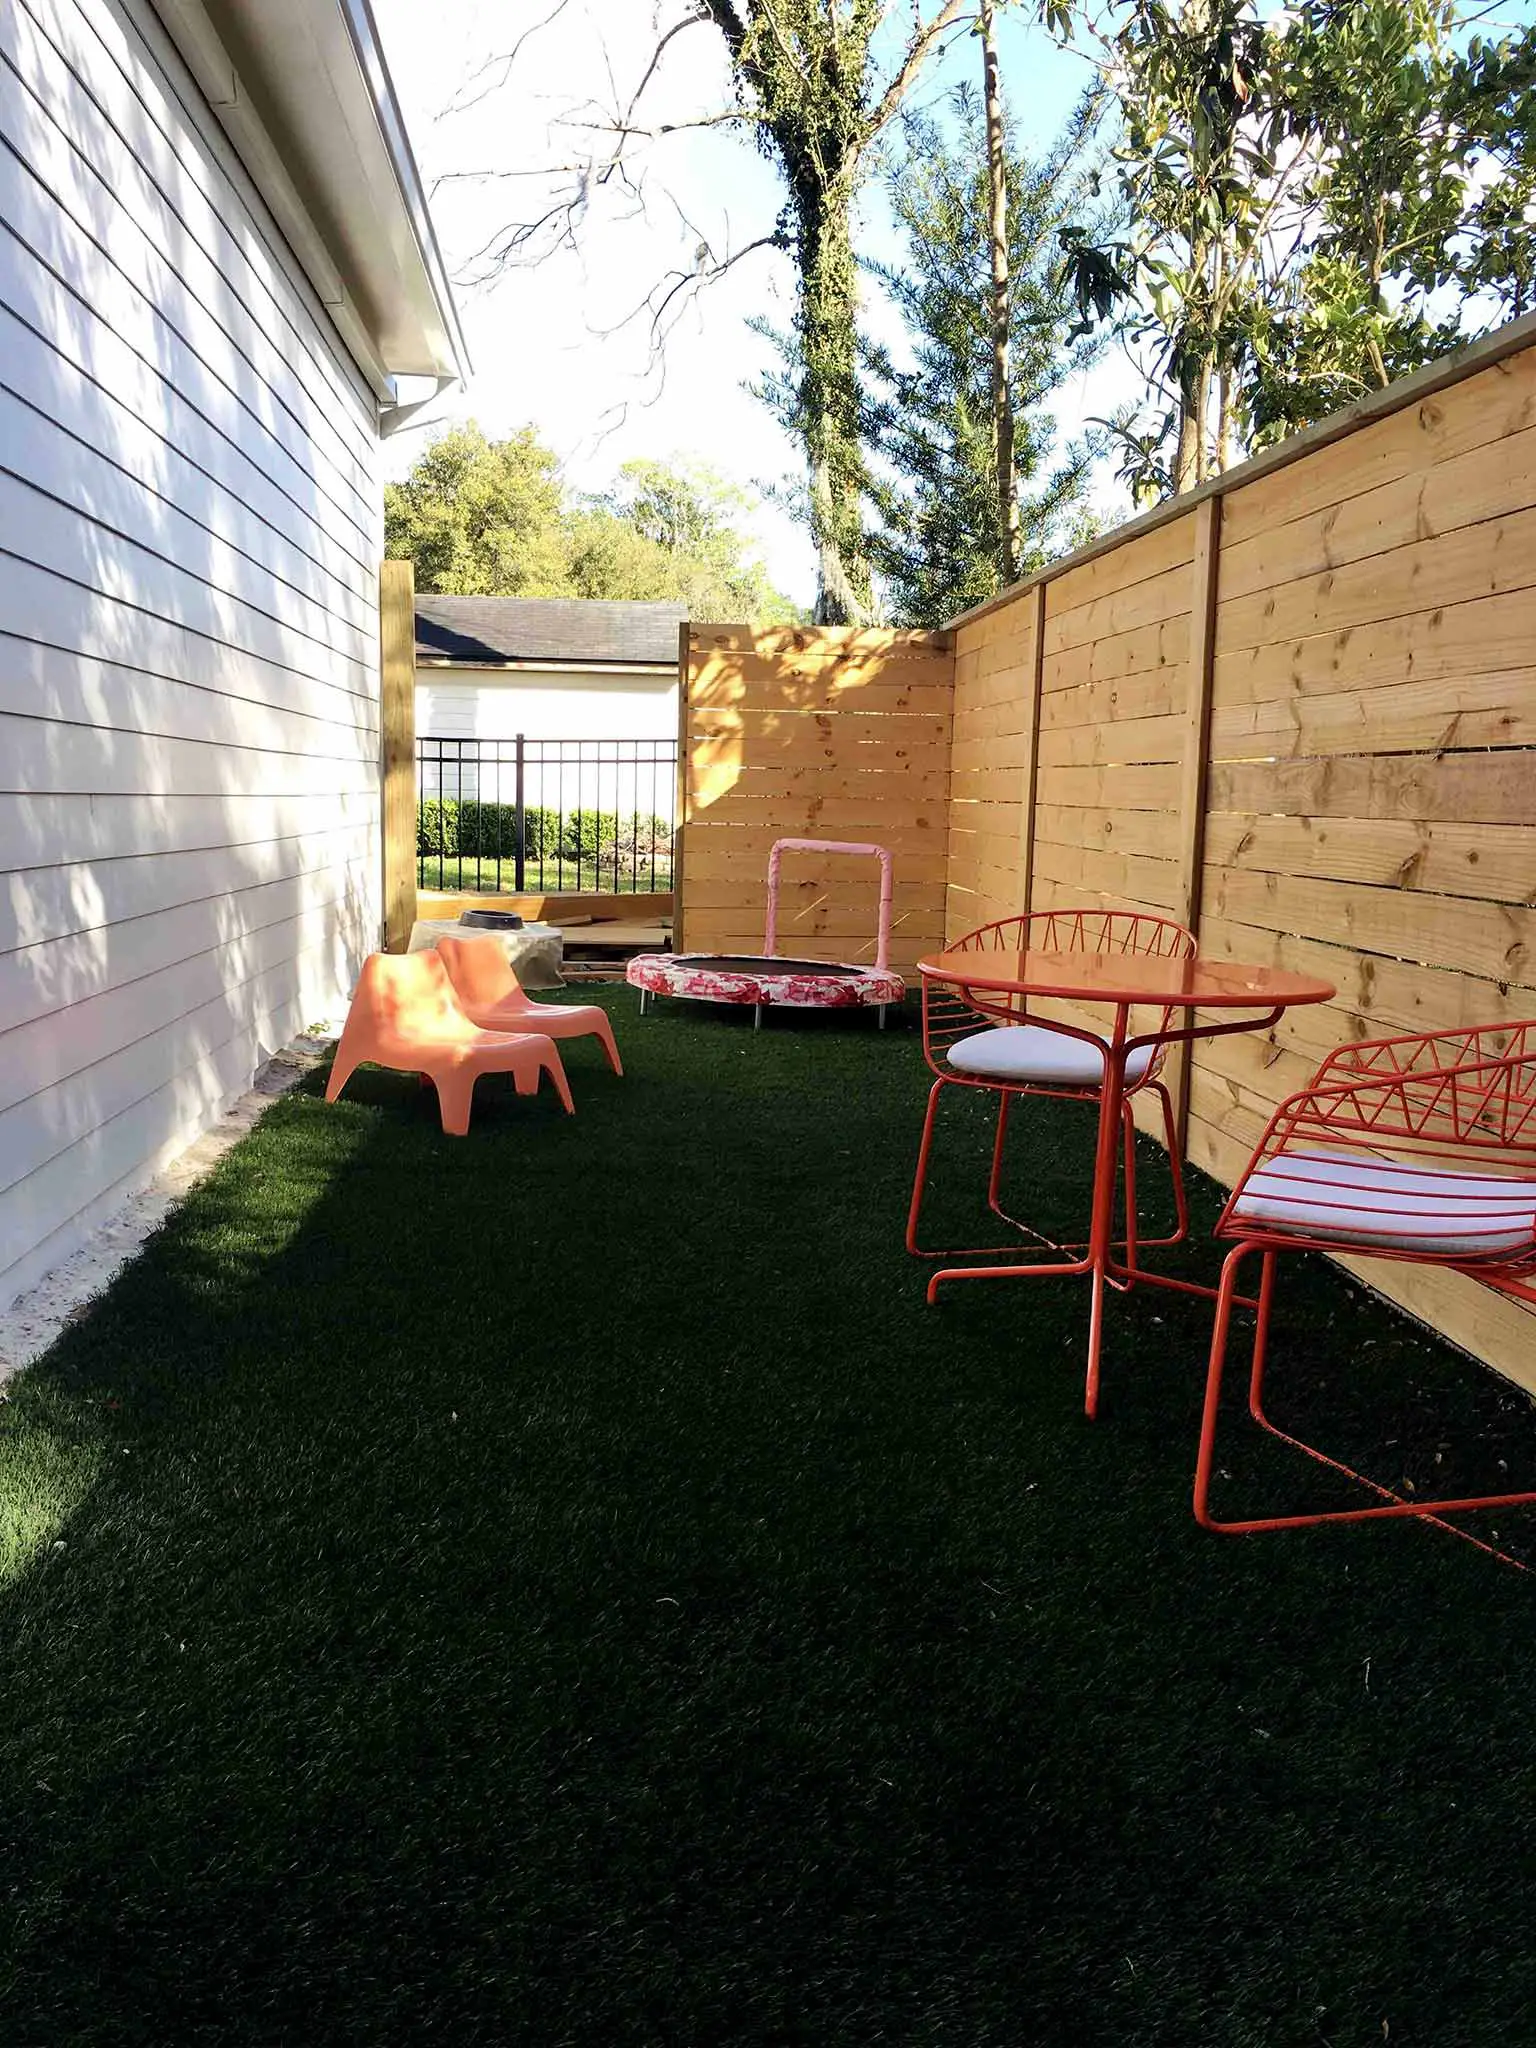 Kids play space - How we planned our backyard space - That Homebird Life Blog